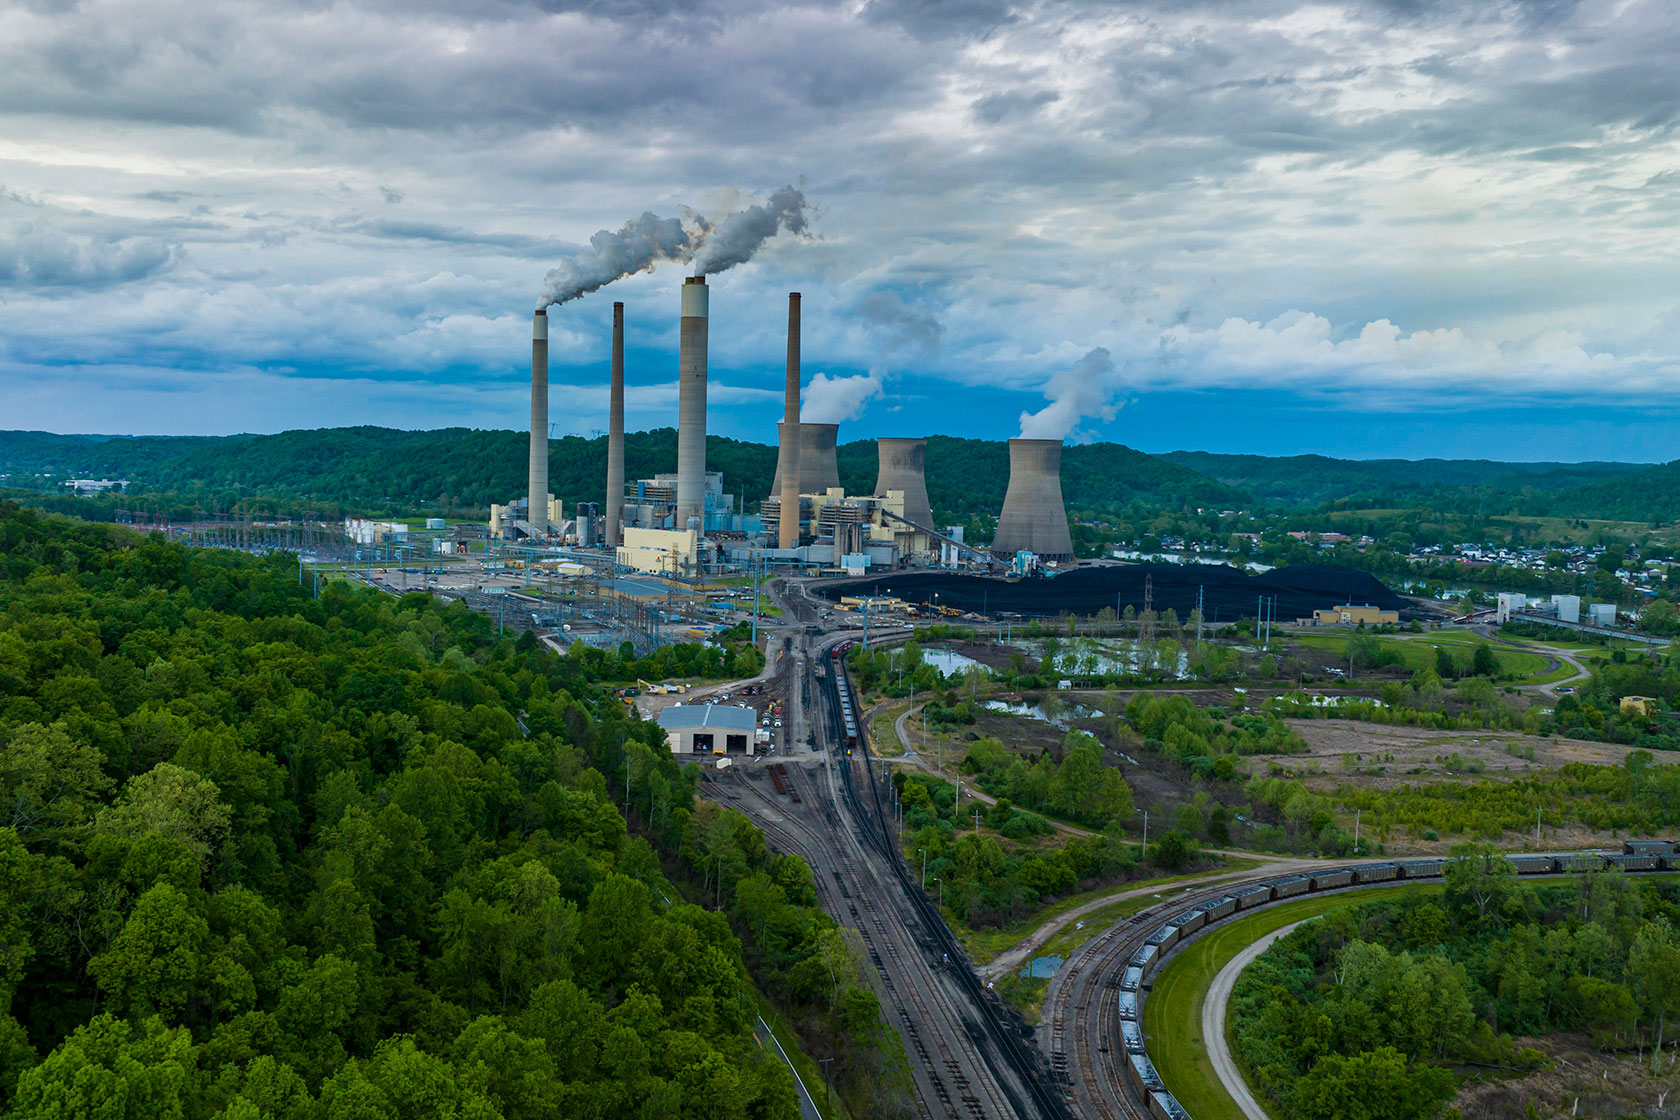 Photo shows smoke rising out of smokestacks at a power plant nestled among green hills against a cloudy sky